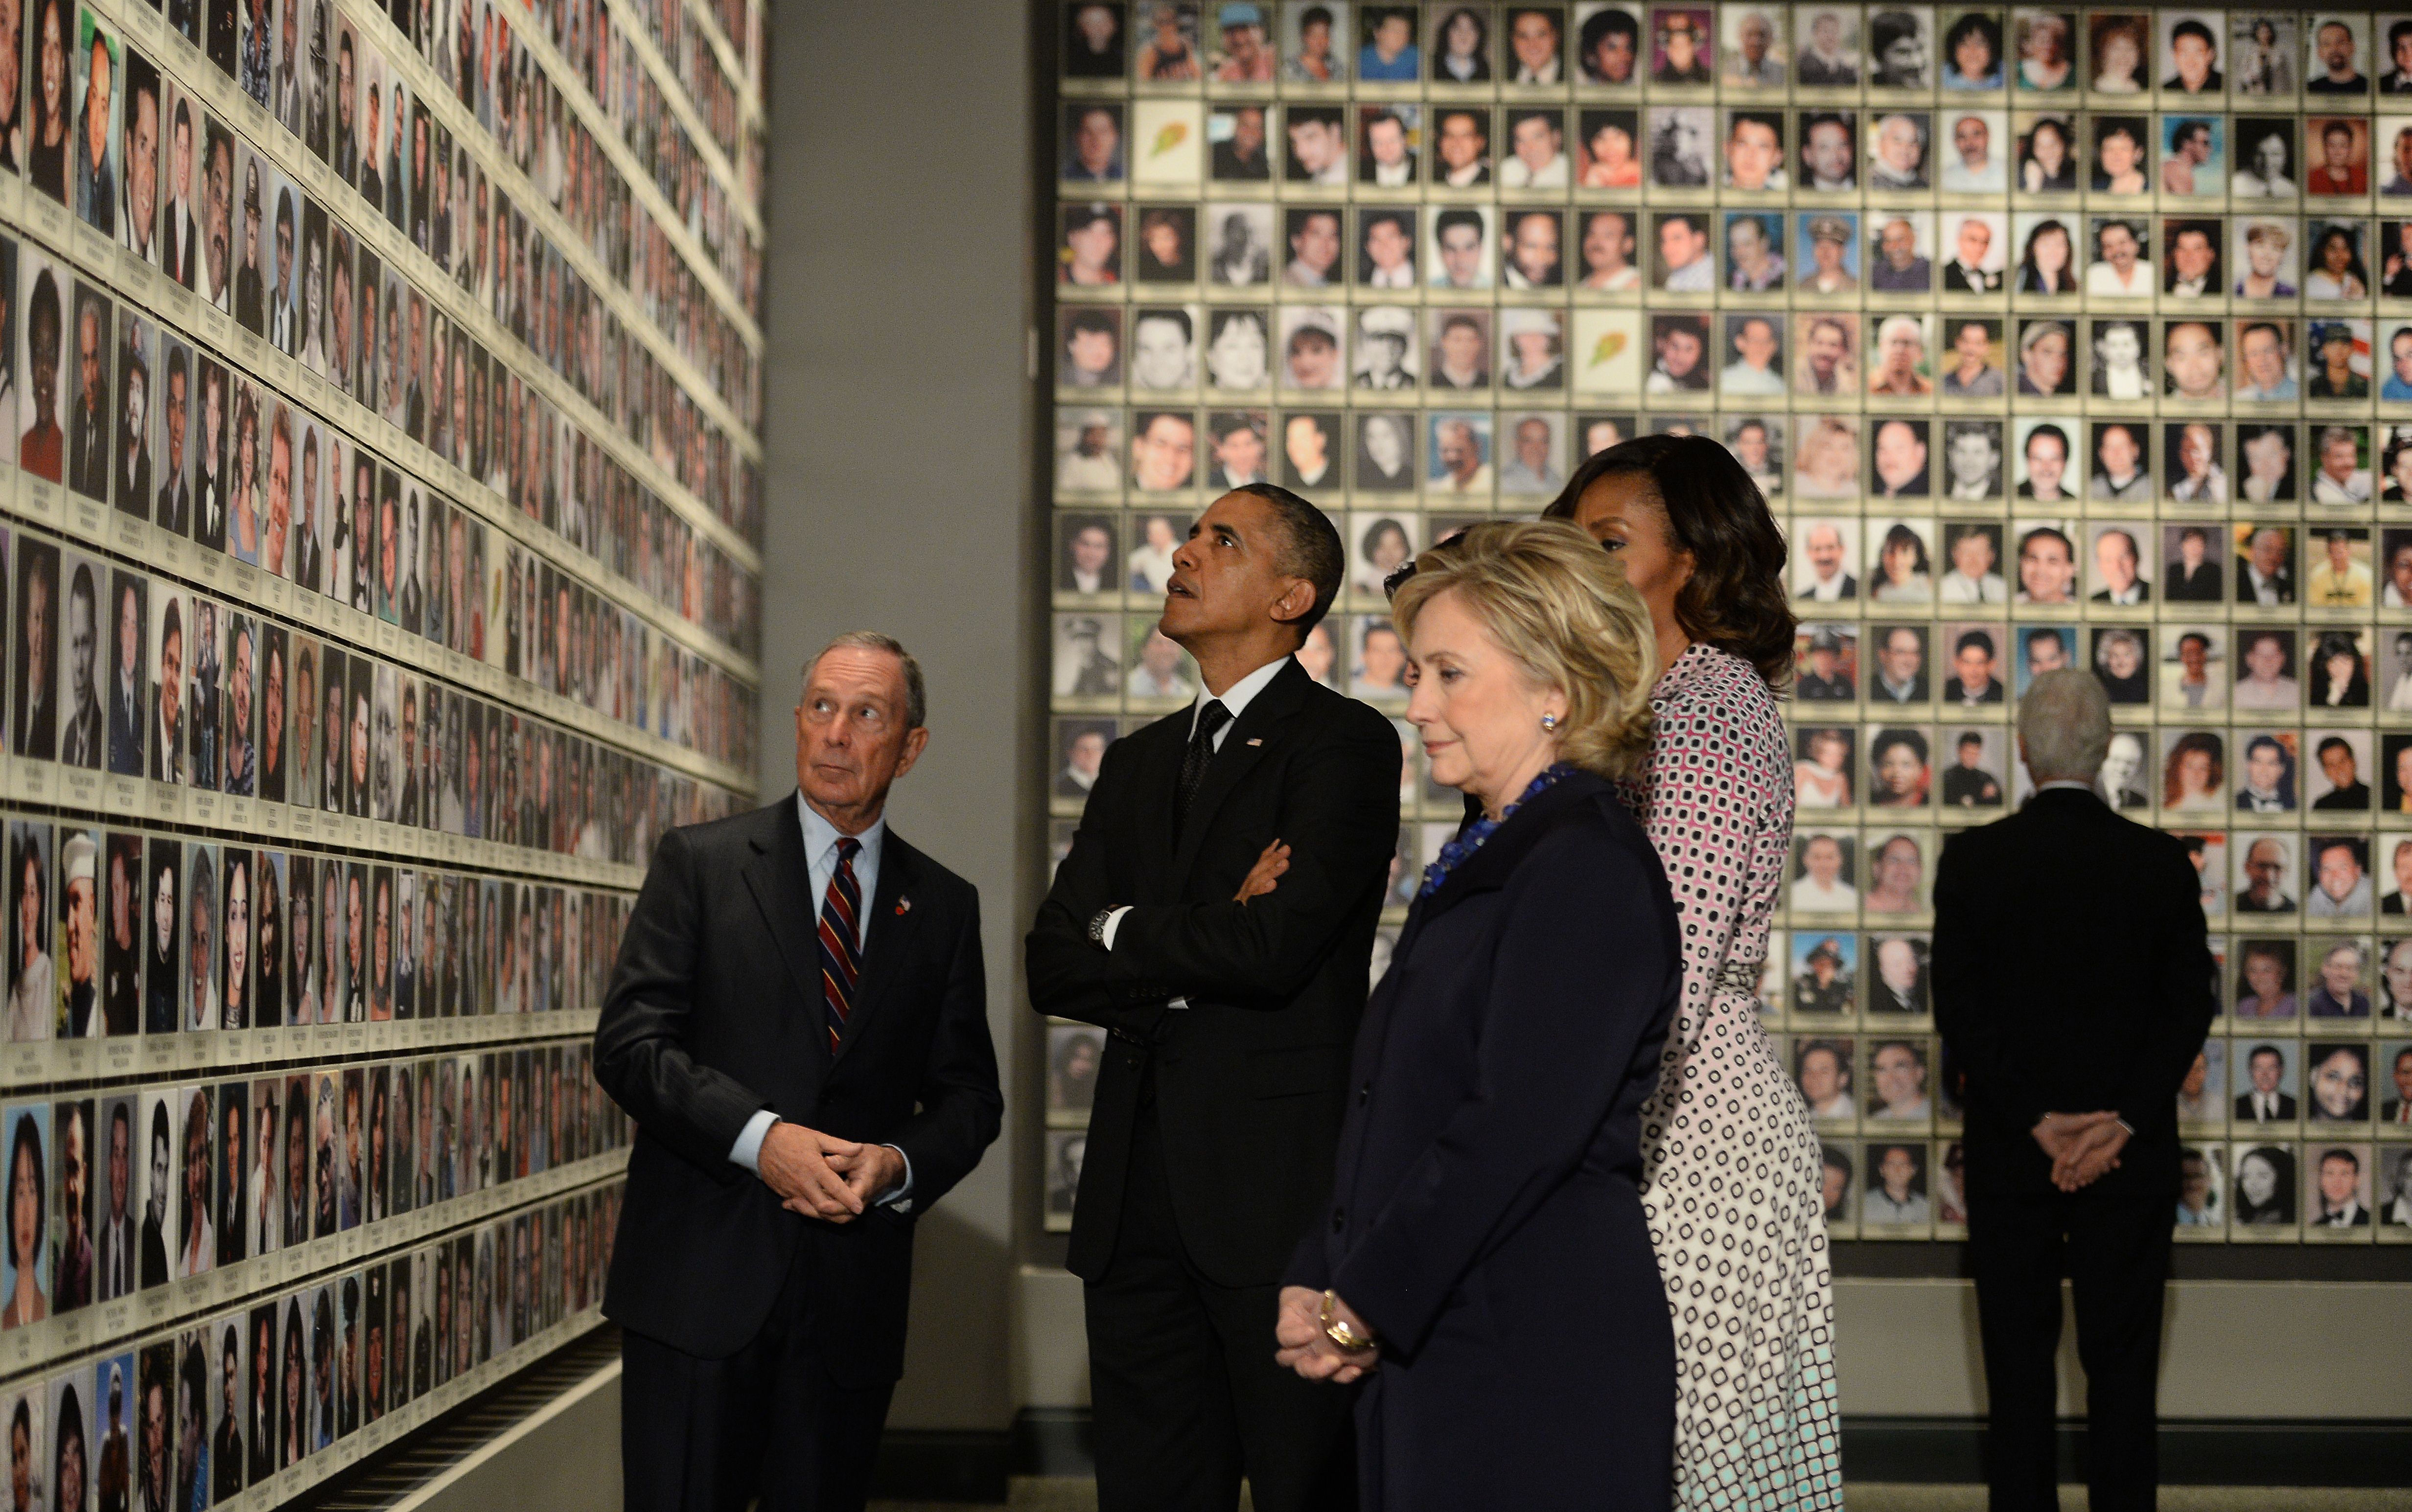 President Barack Obama, former New York Mayor Michael Bloomberg, First Lady Michelle Obama, former Secretary of State Hillary Clinton and former President Bill Clinton tour the National September 11 Memorial & Museum on May 15, 2014. (AFP PHOTO/Jewel Samad/Getty Images)